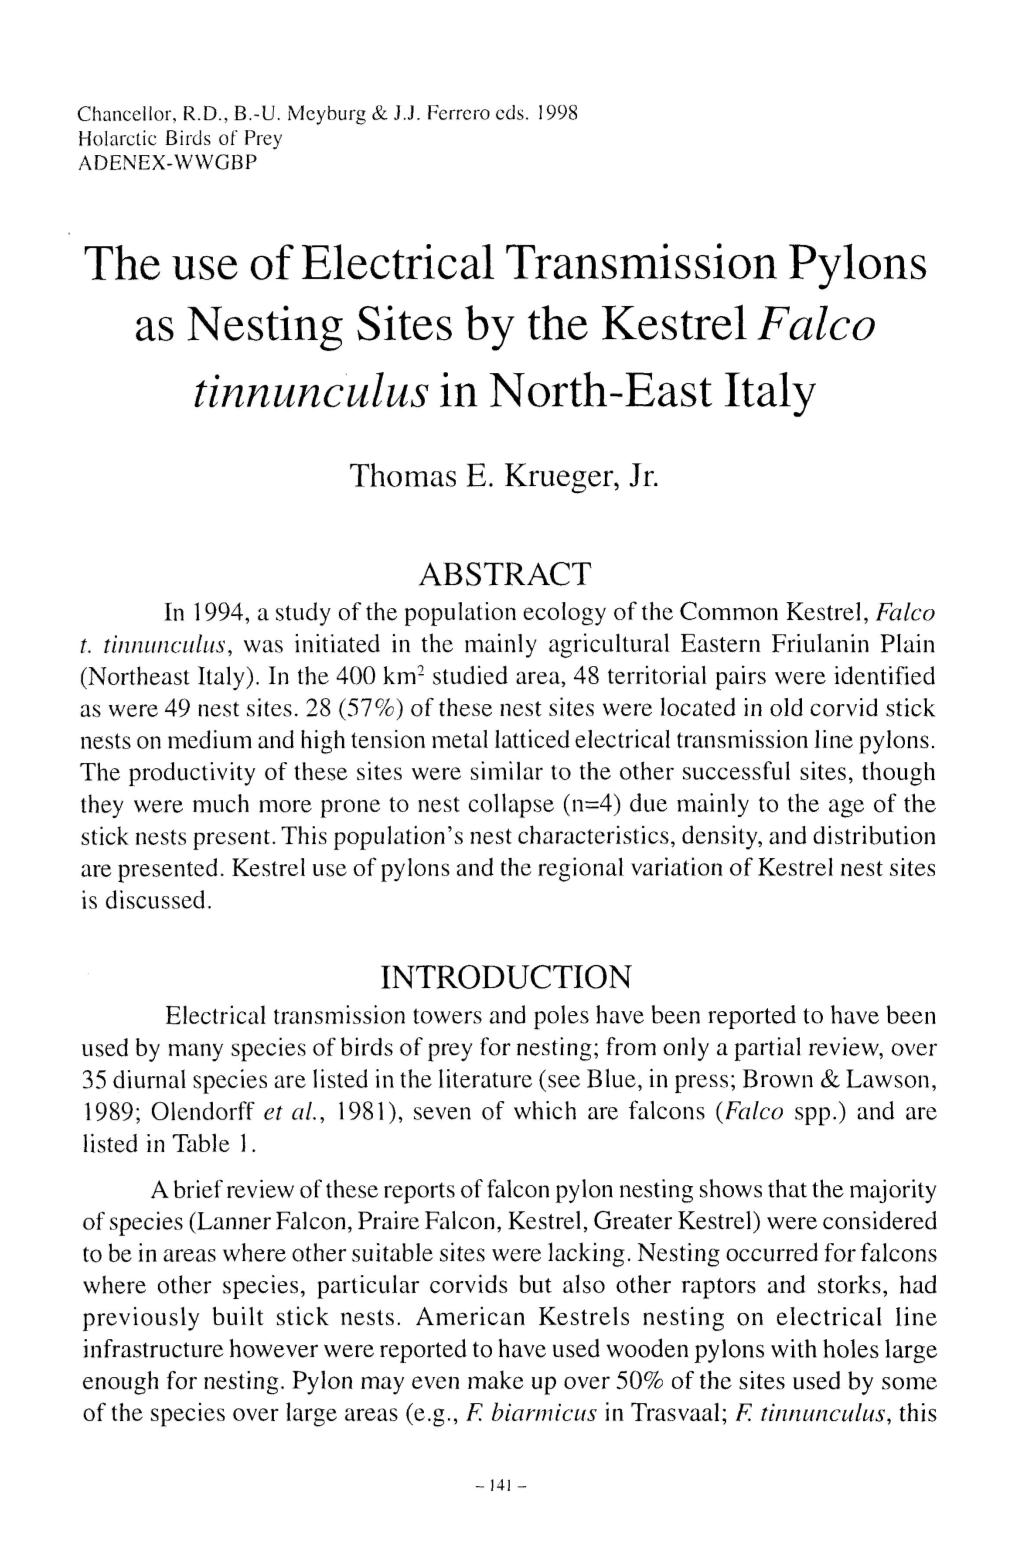 The Use of Electrical Transmission Pylons As Nesting Sites by the Kestrel Falco Tinnunculus in North-East Italy